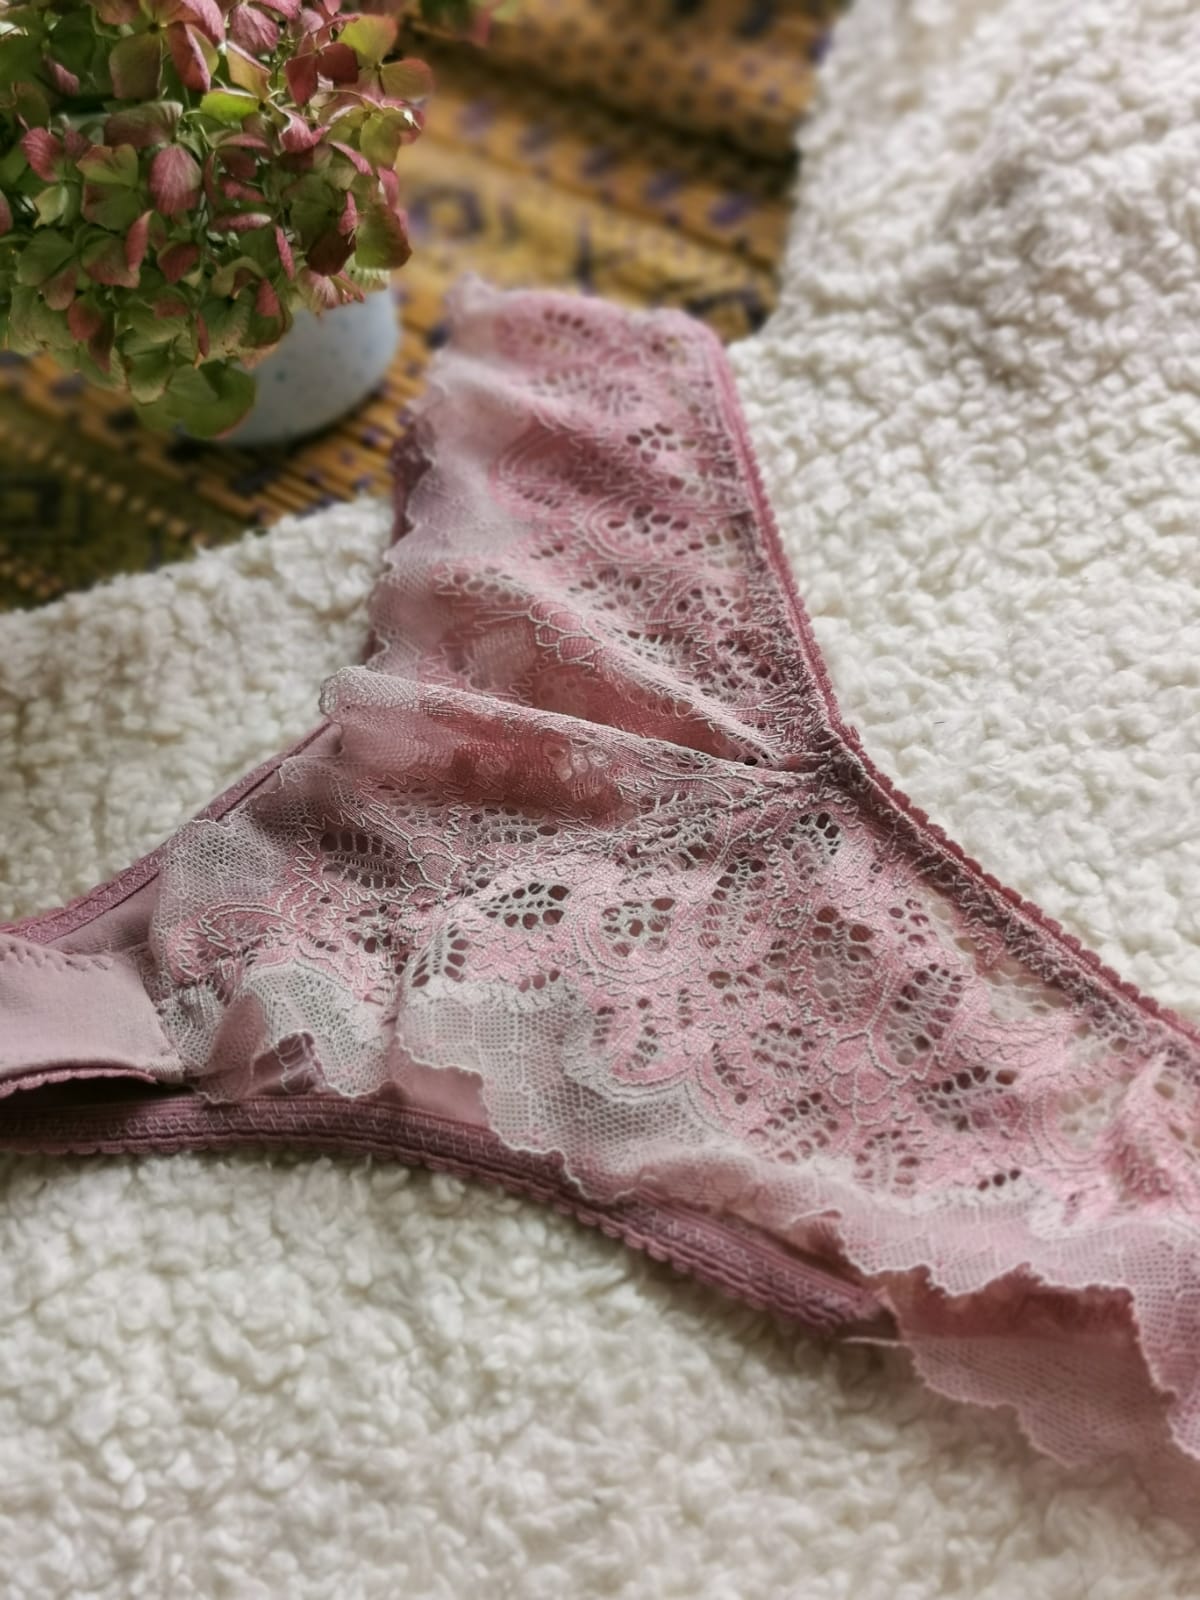 Lace Inset Thong Panty  Victoria's Secret Indonesia